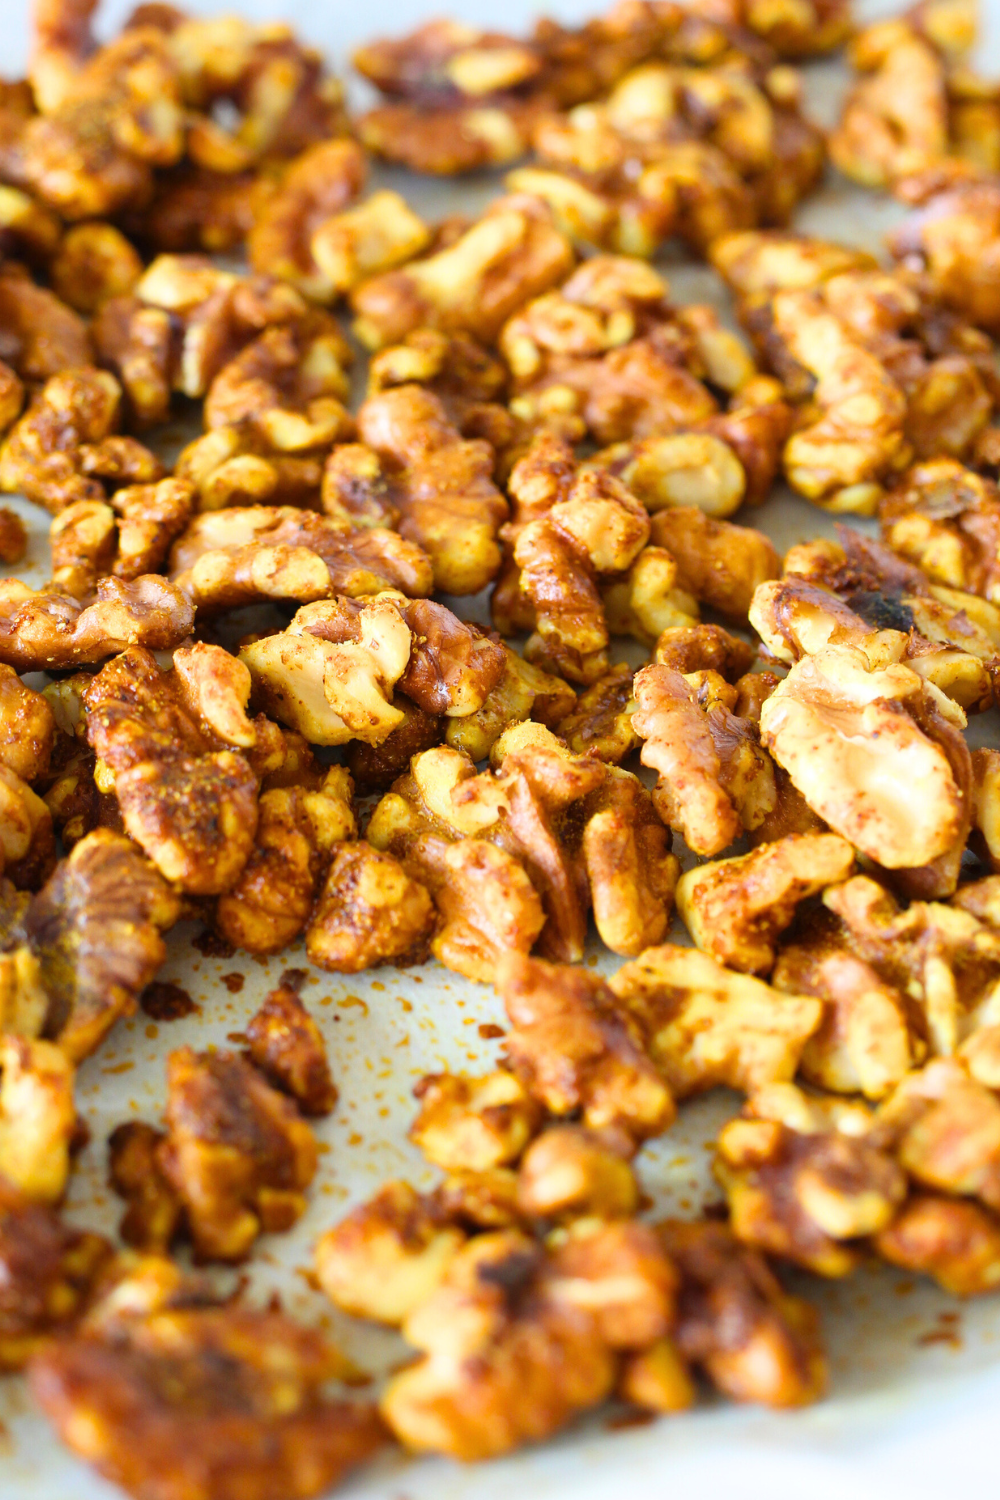 top view of an easy keto appetizer made from oven roasted walnuts tossed in curry spices